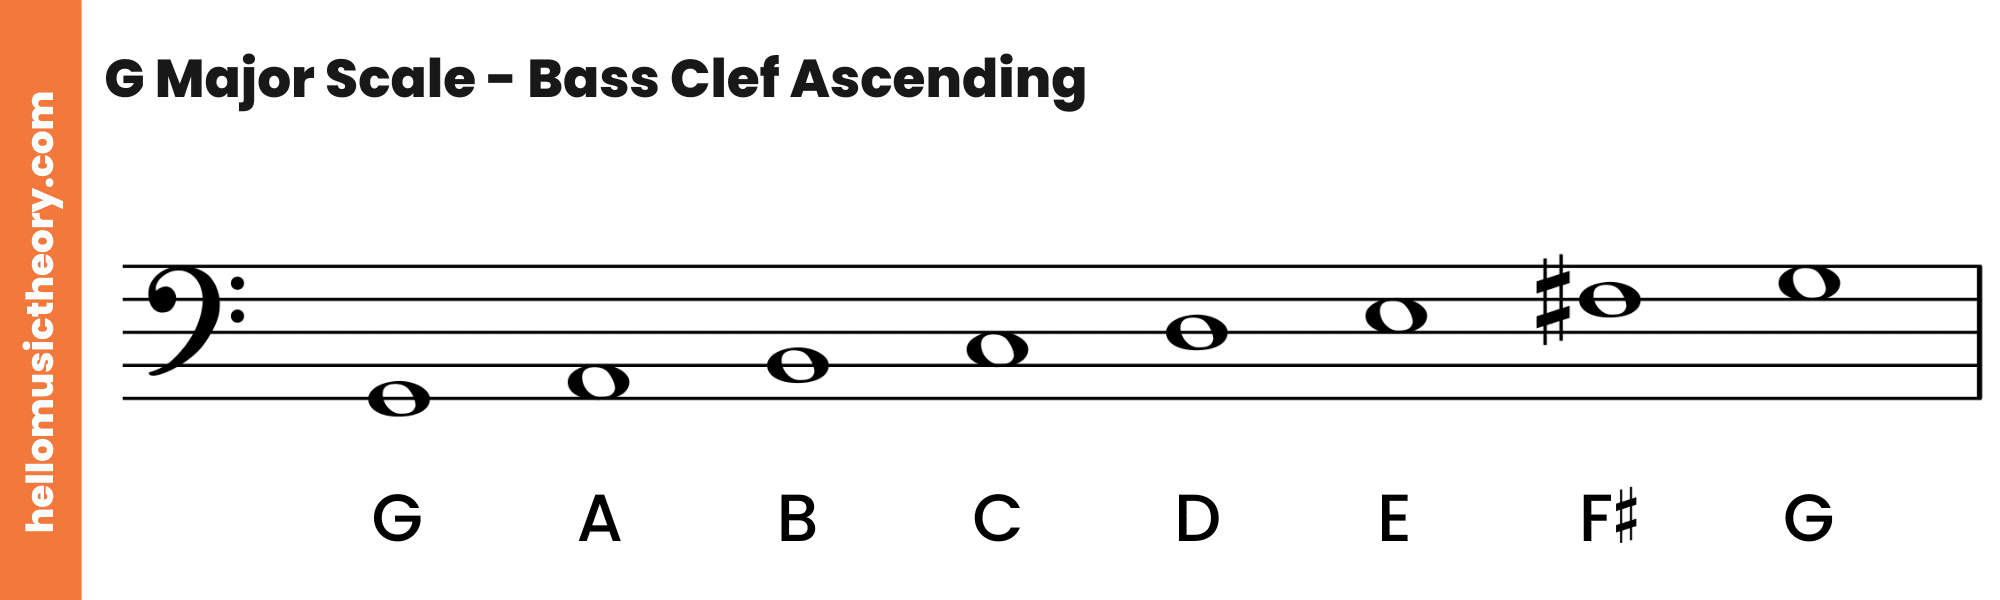 G Major Scale Bass Clef Ascending